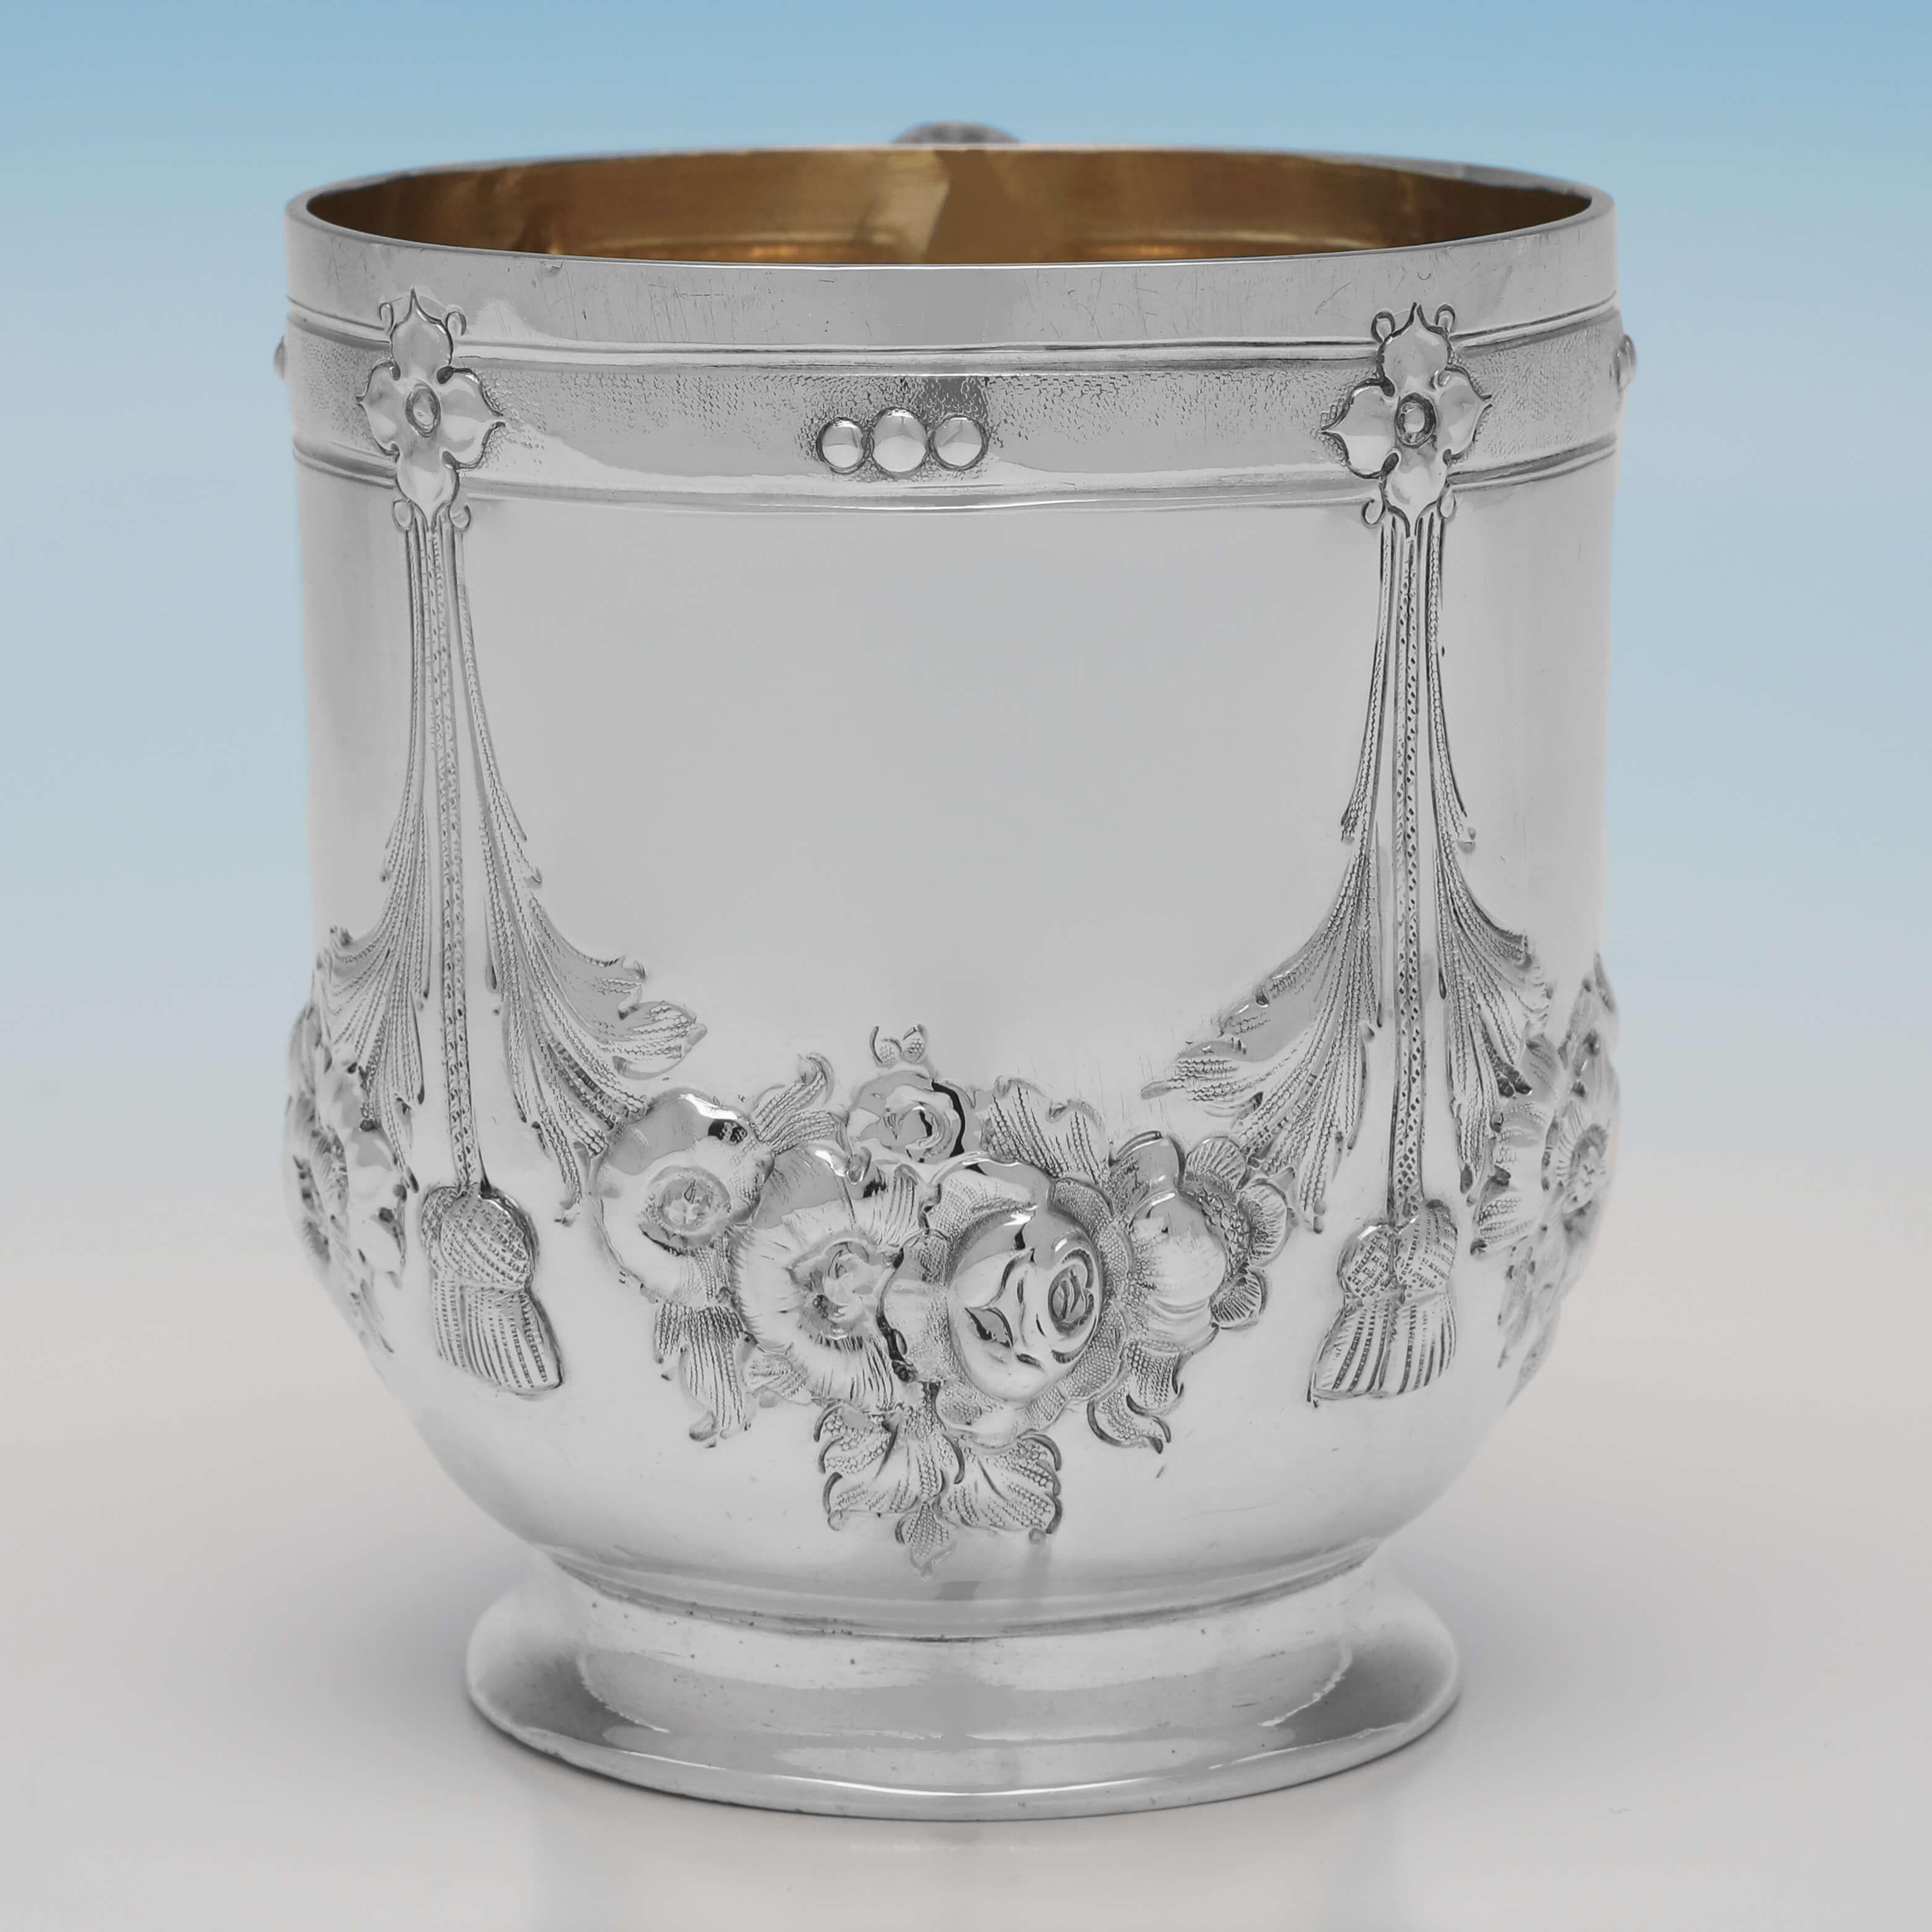 Hallmarked in London in 1867 by Henry John Lias & Son, this attractive, Victorian, Antique Sterling Silver Christening Mug, features chased and engraved decoration to the body, and a gilt interior. 

The christening mug measures 3.25